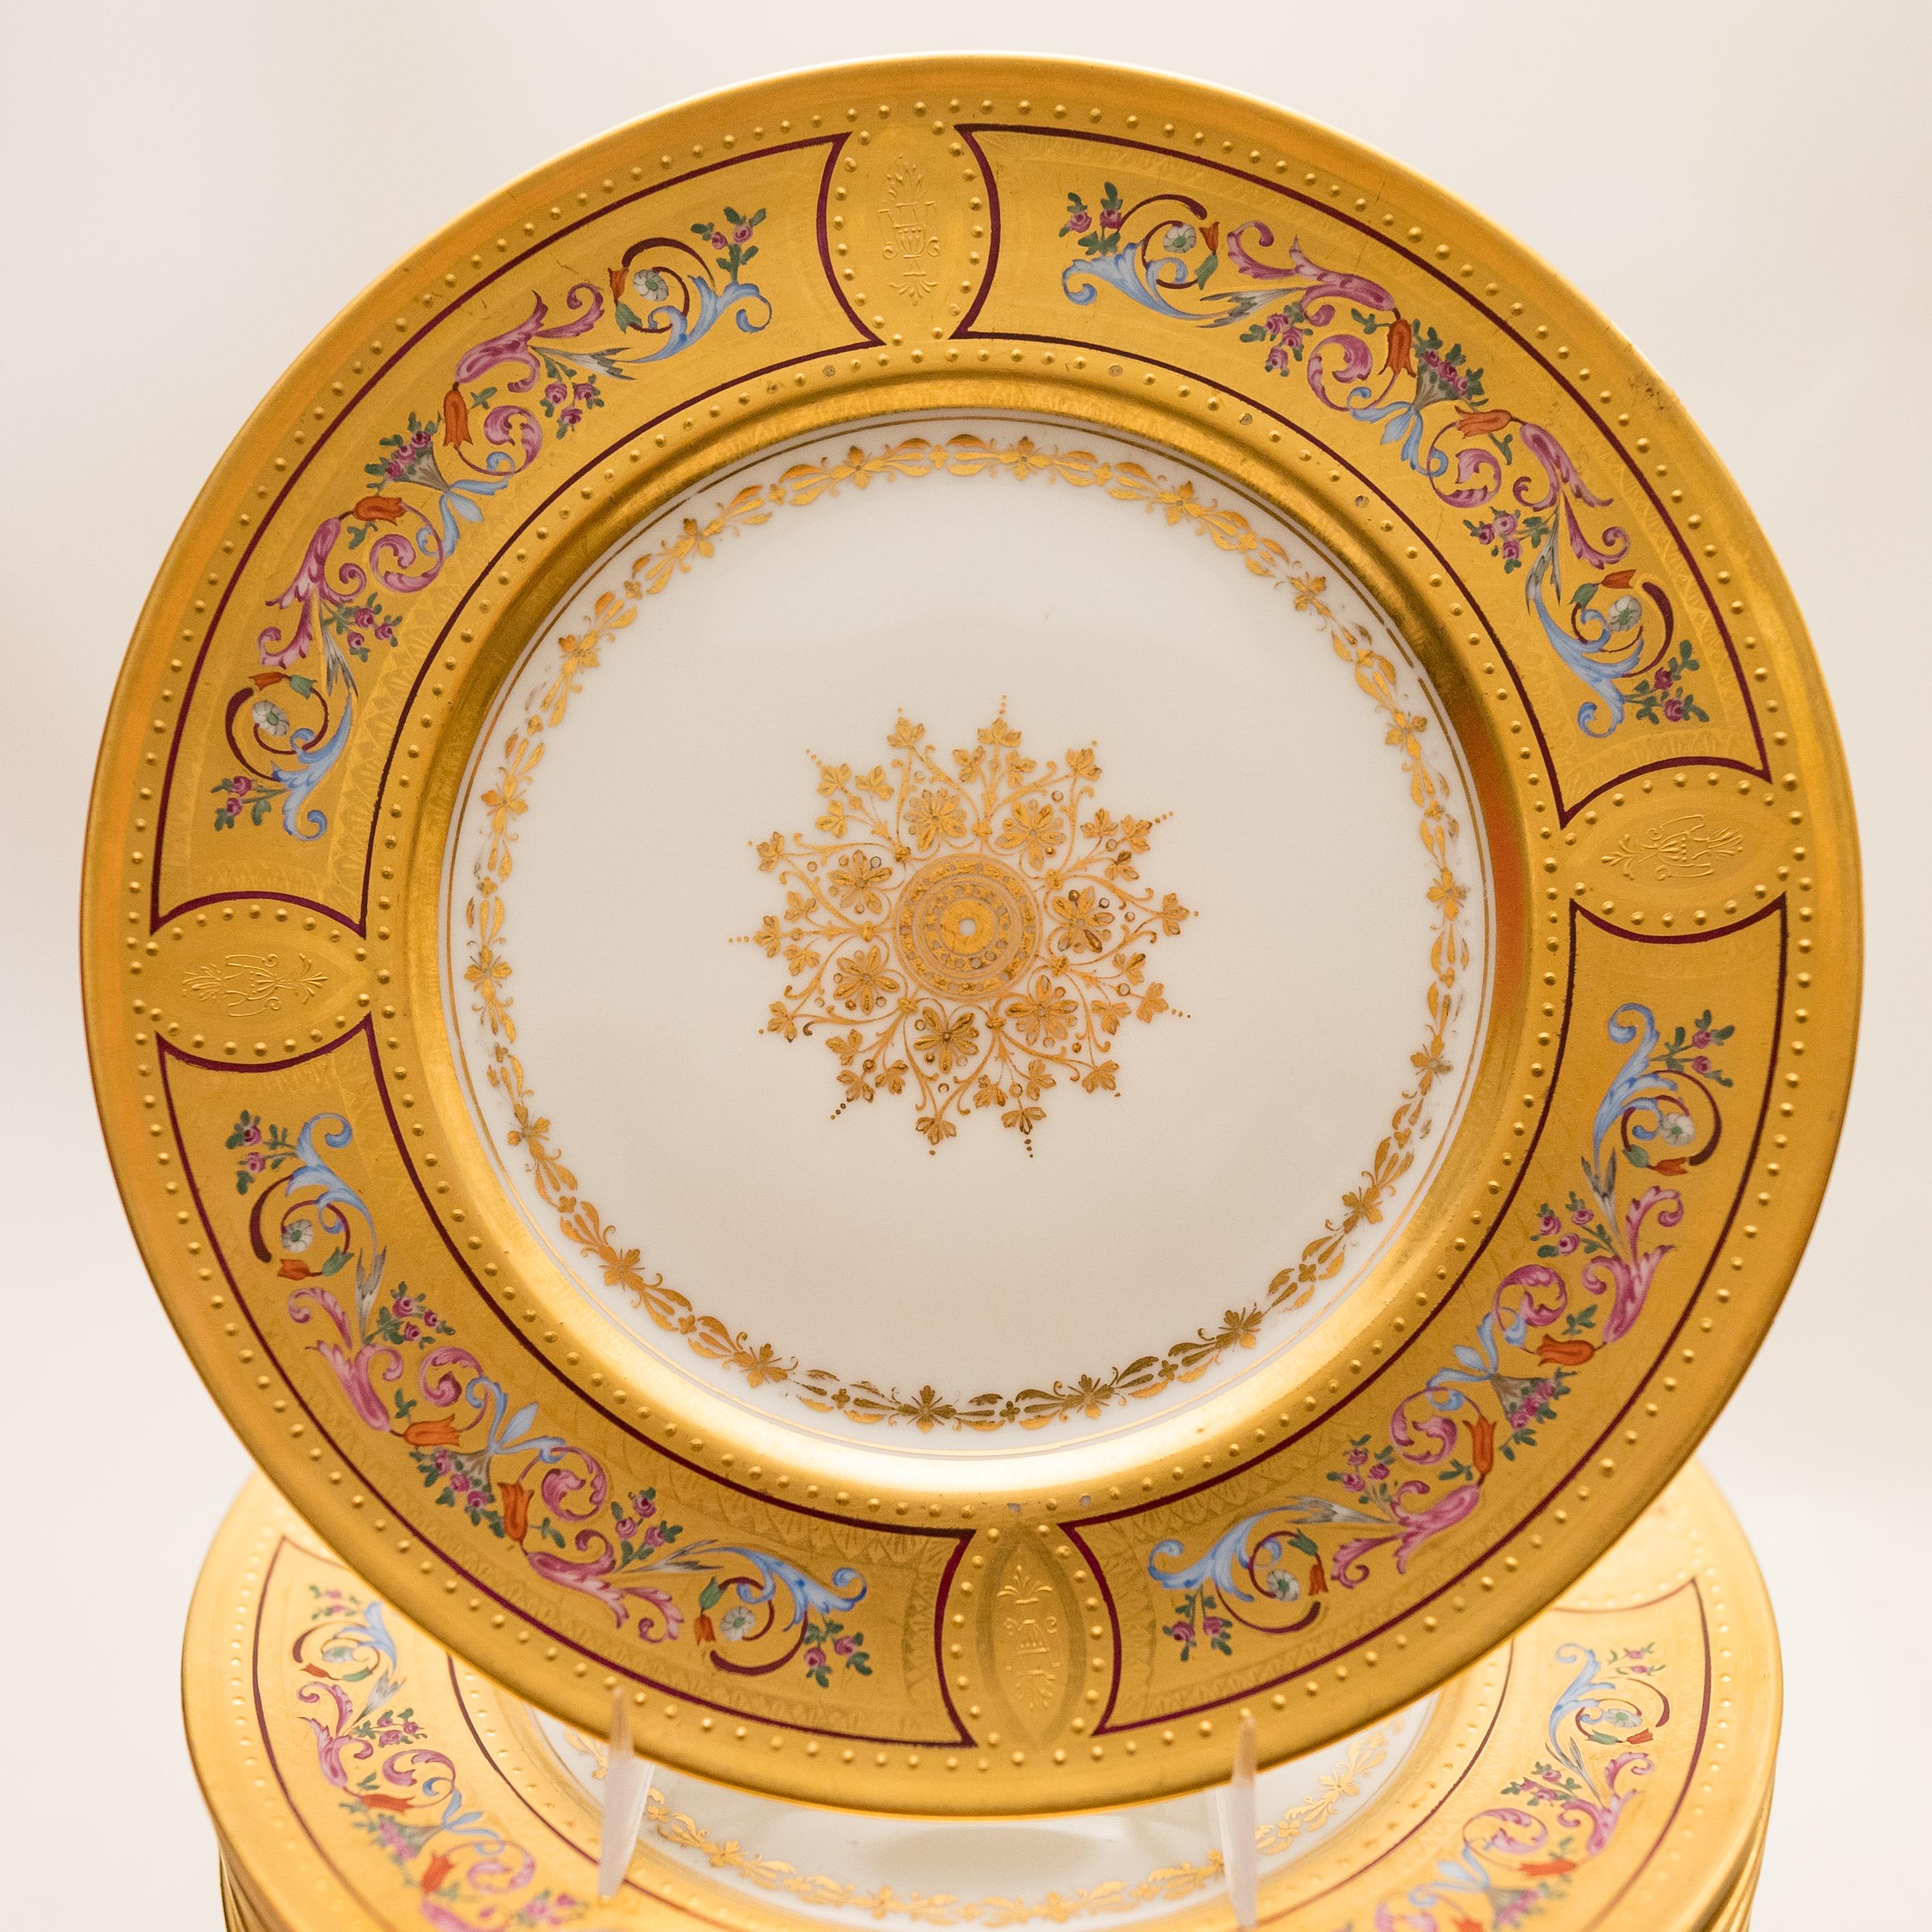 An exquisite set of dessert plates featuring colorful and detailed enamel work on their gilded collars. Beautiful swags of florals and urns in vibrant enameling with double ruby banding. They also feature a gilded snowflake center medallion. In